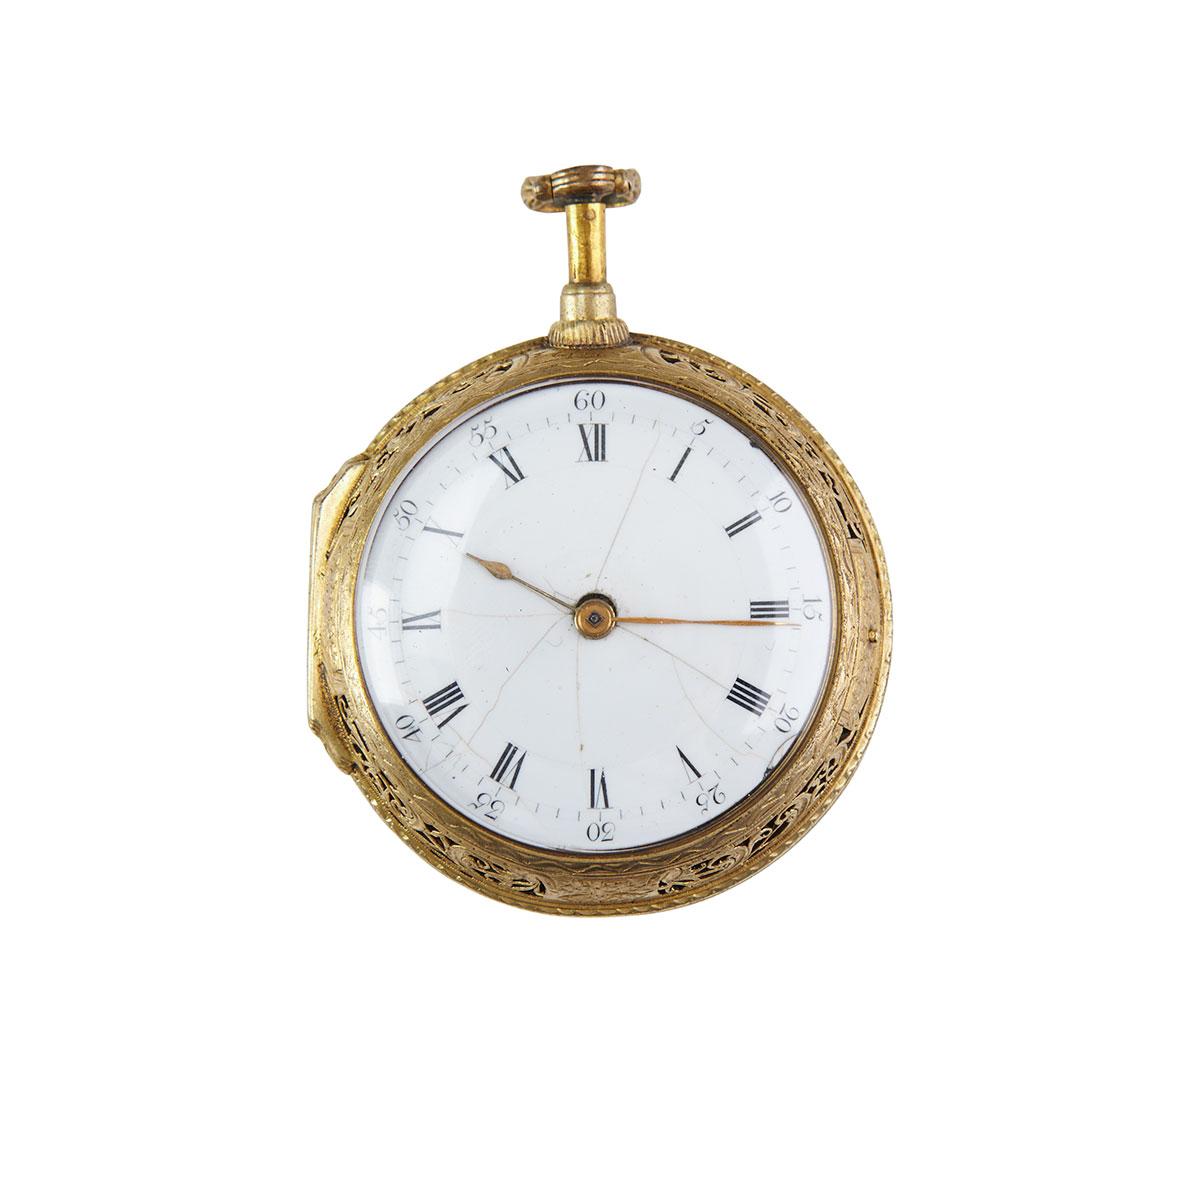 Thomas Windmill Of London Hour Repeater Pocket Watch